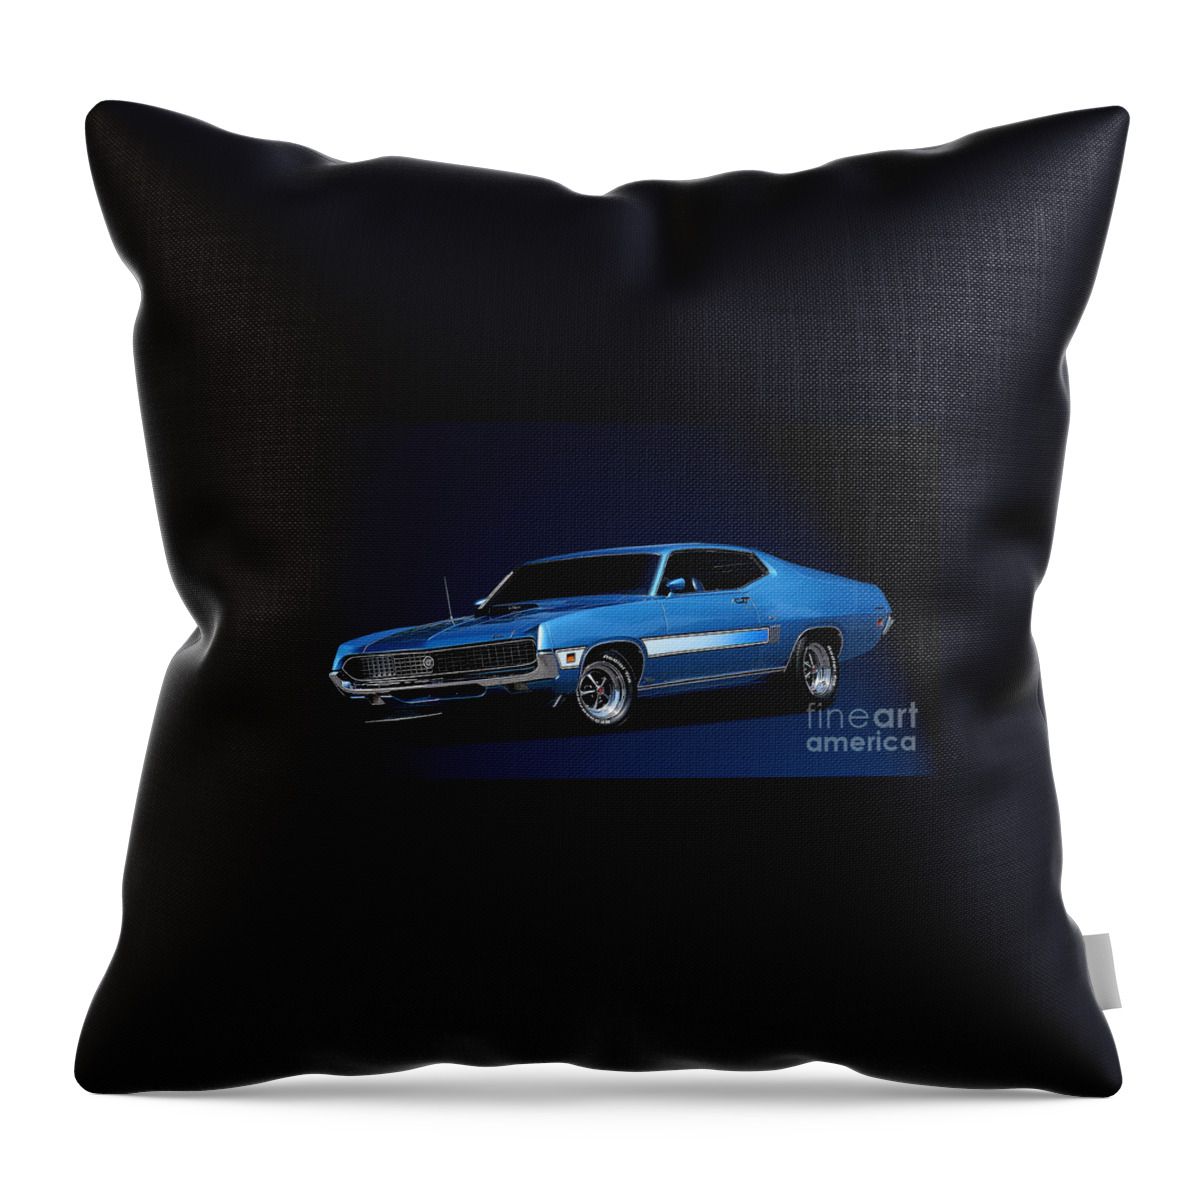 Ford Throw Pillow featuring the photograph Action Photo Original Prints Vintage Muscle Cars 1970 Ford Torino by Action